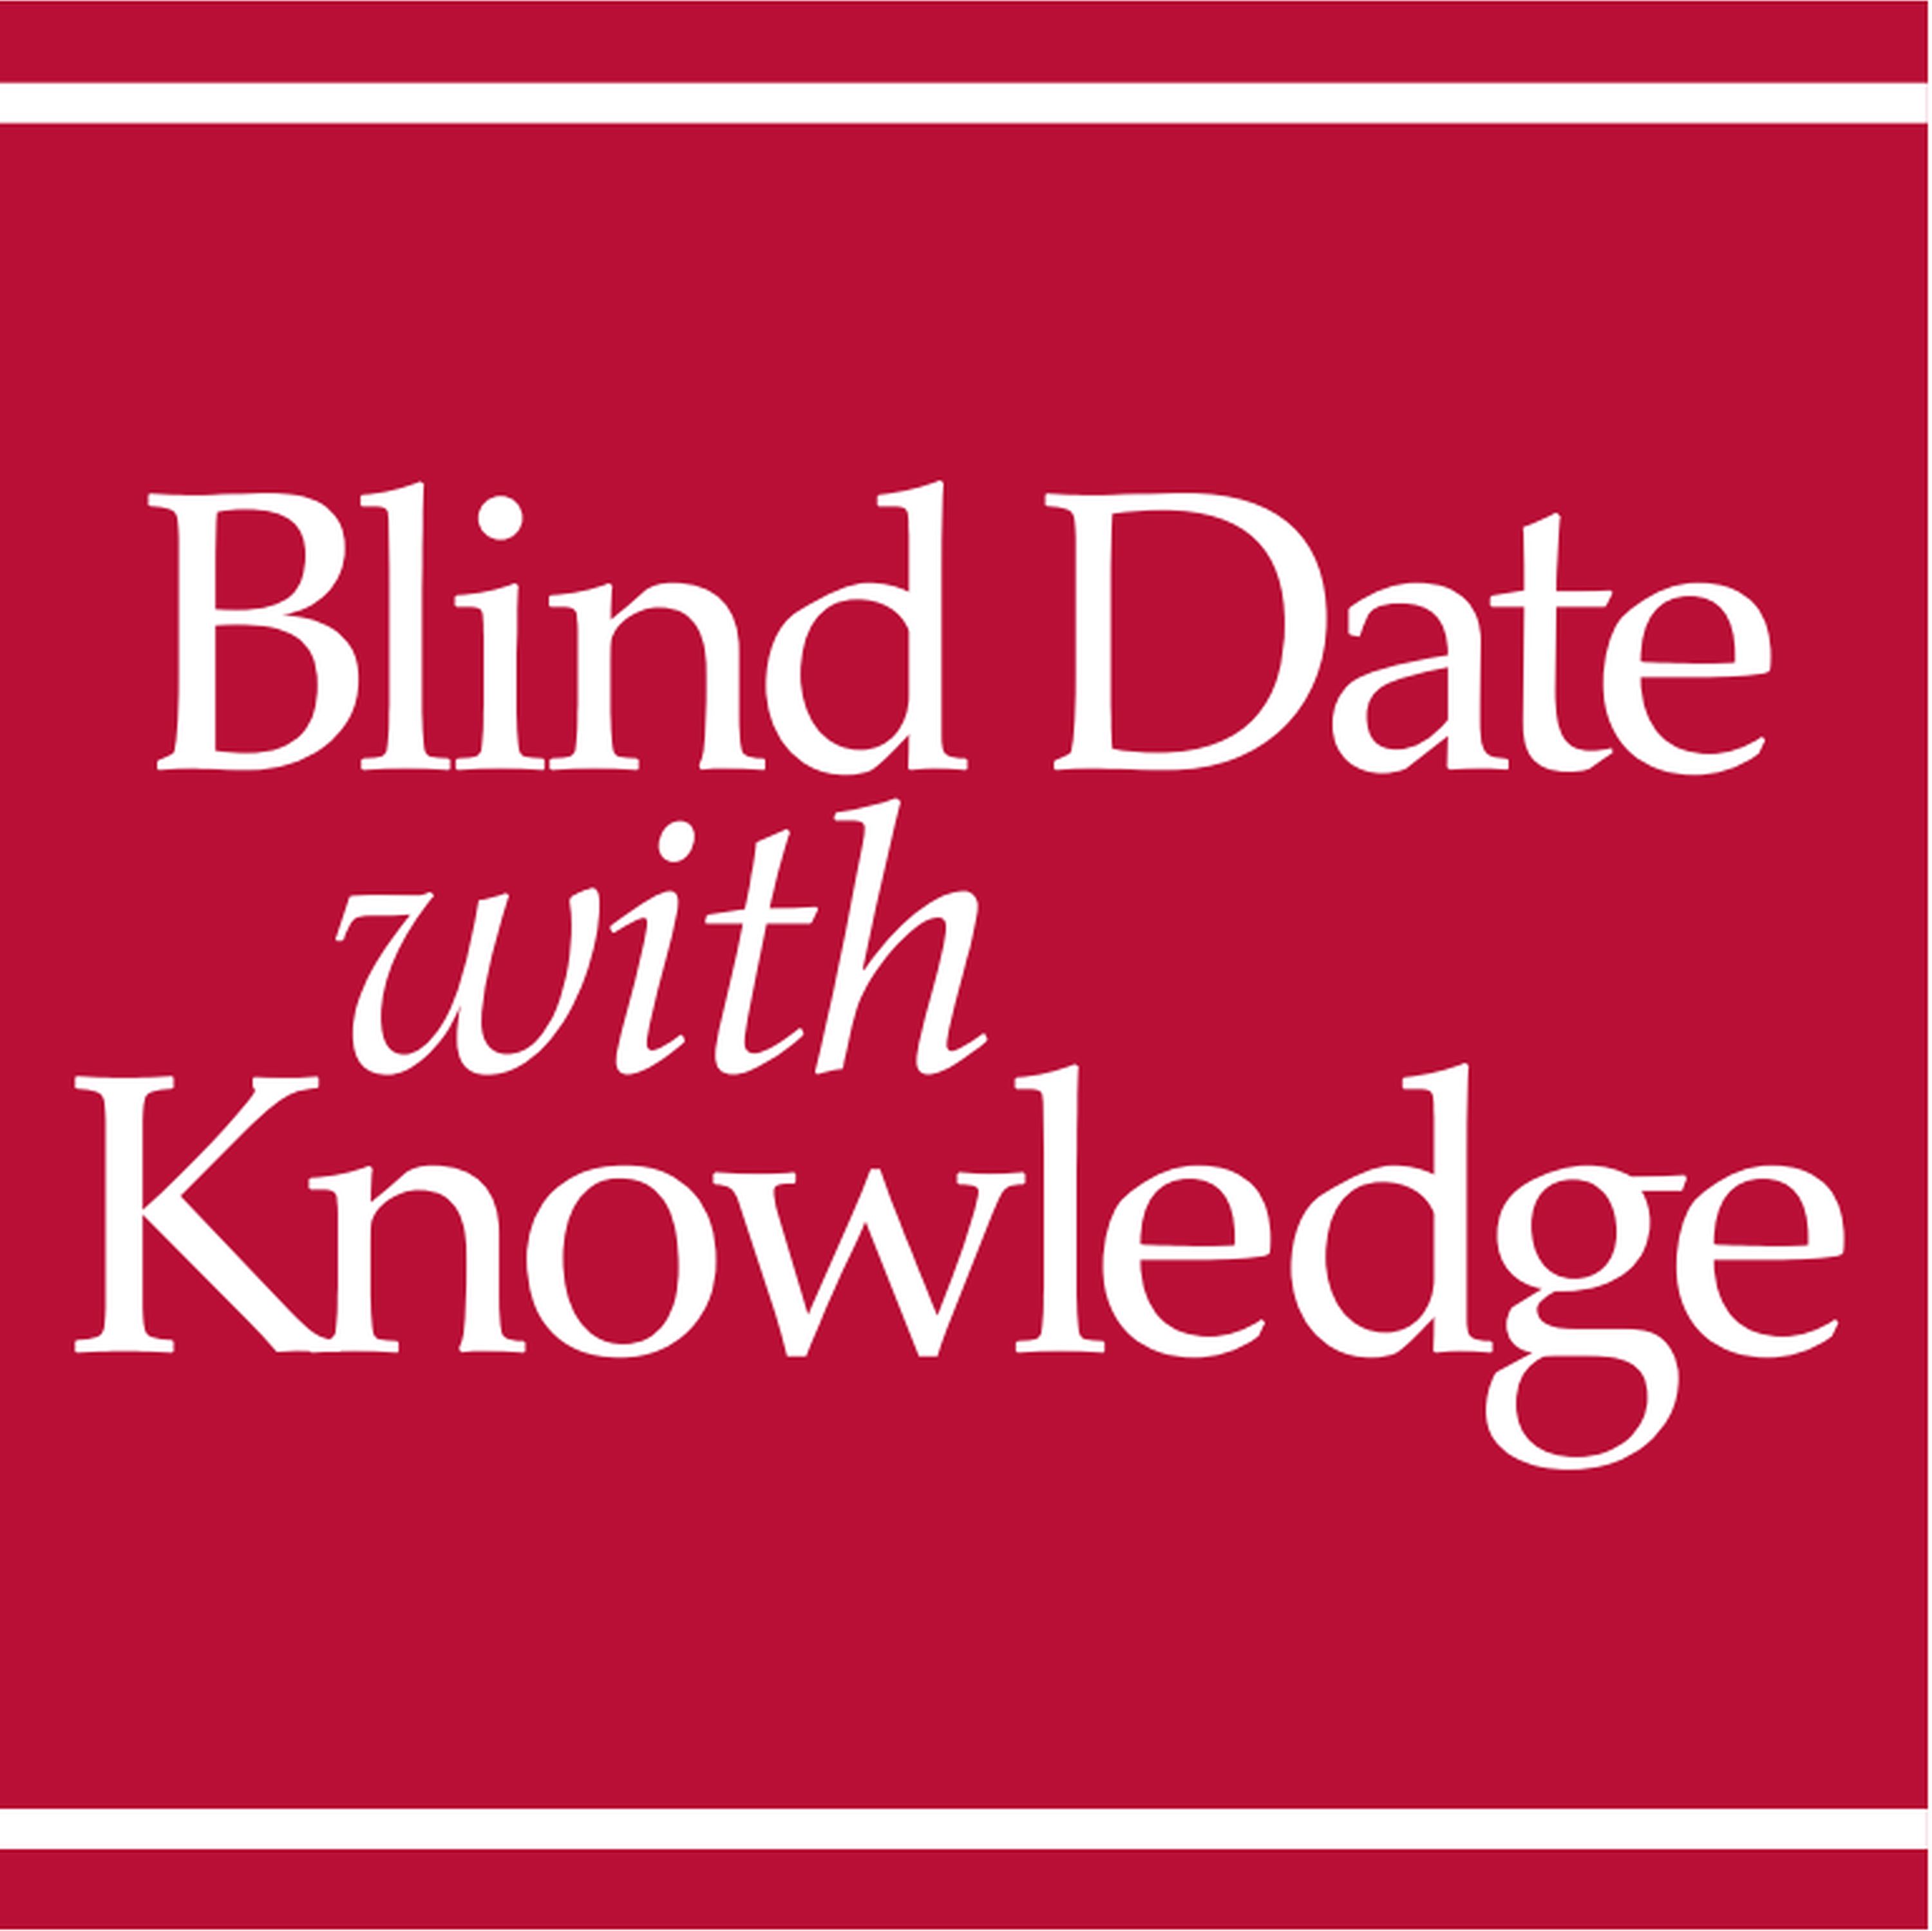 Why lectures are like blind dates